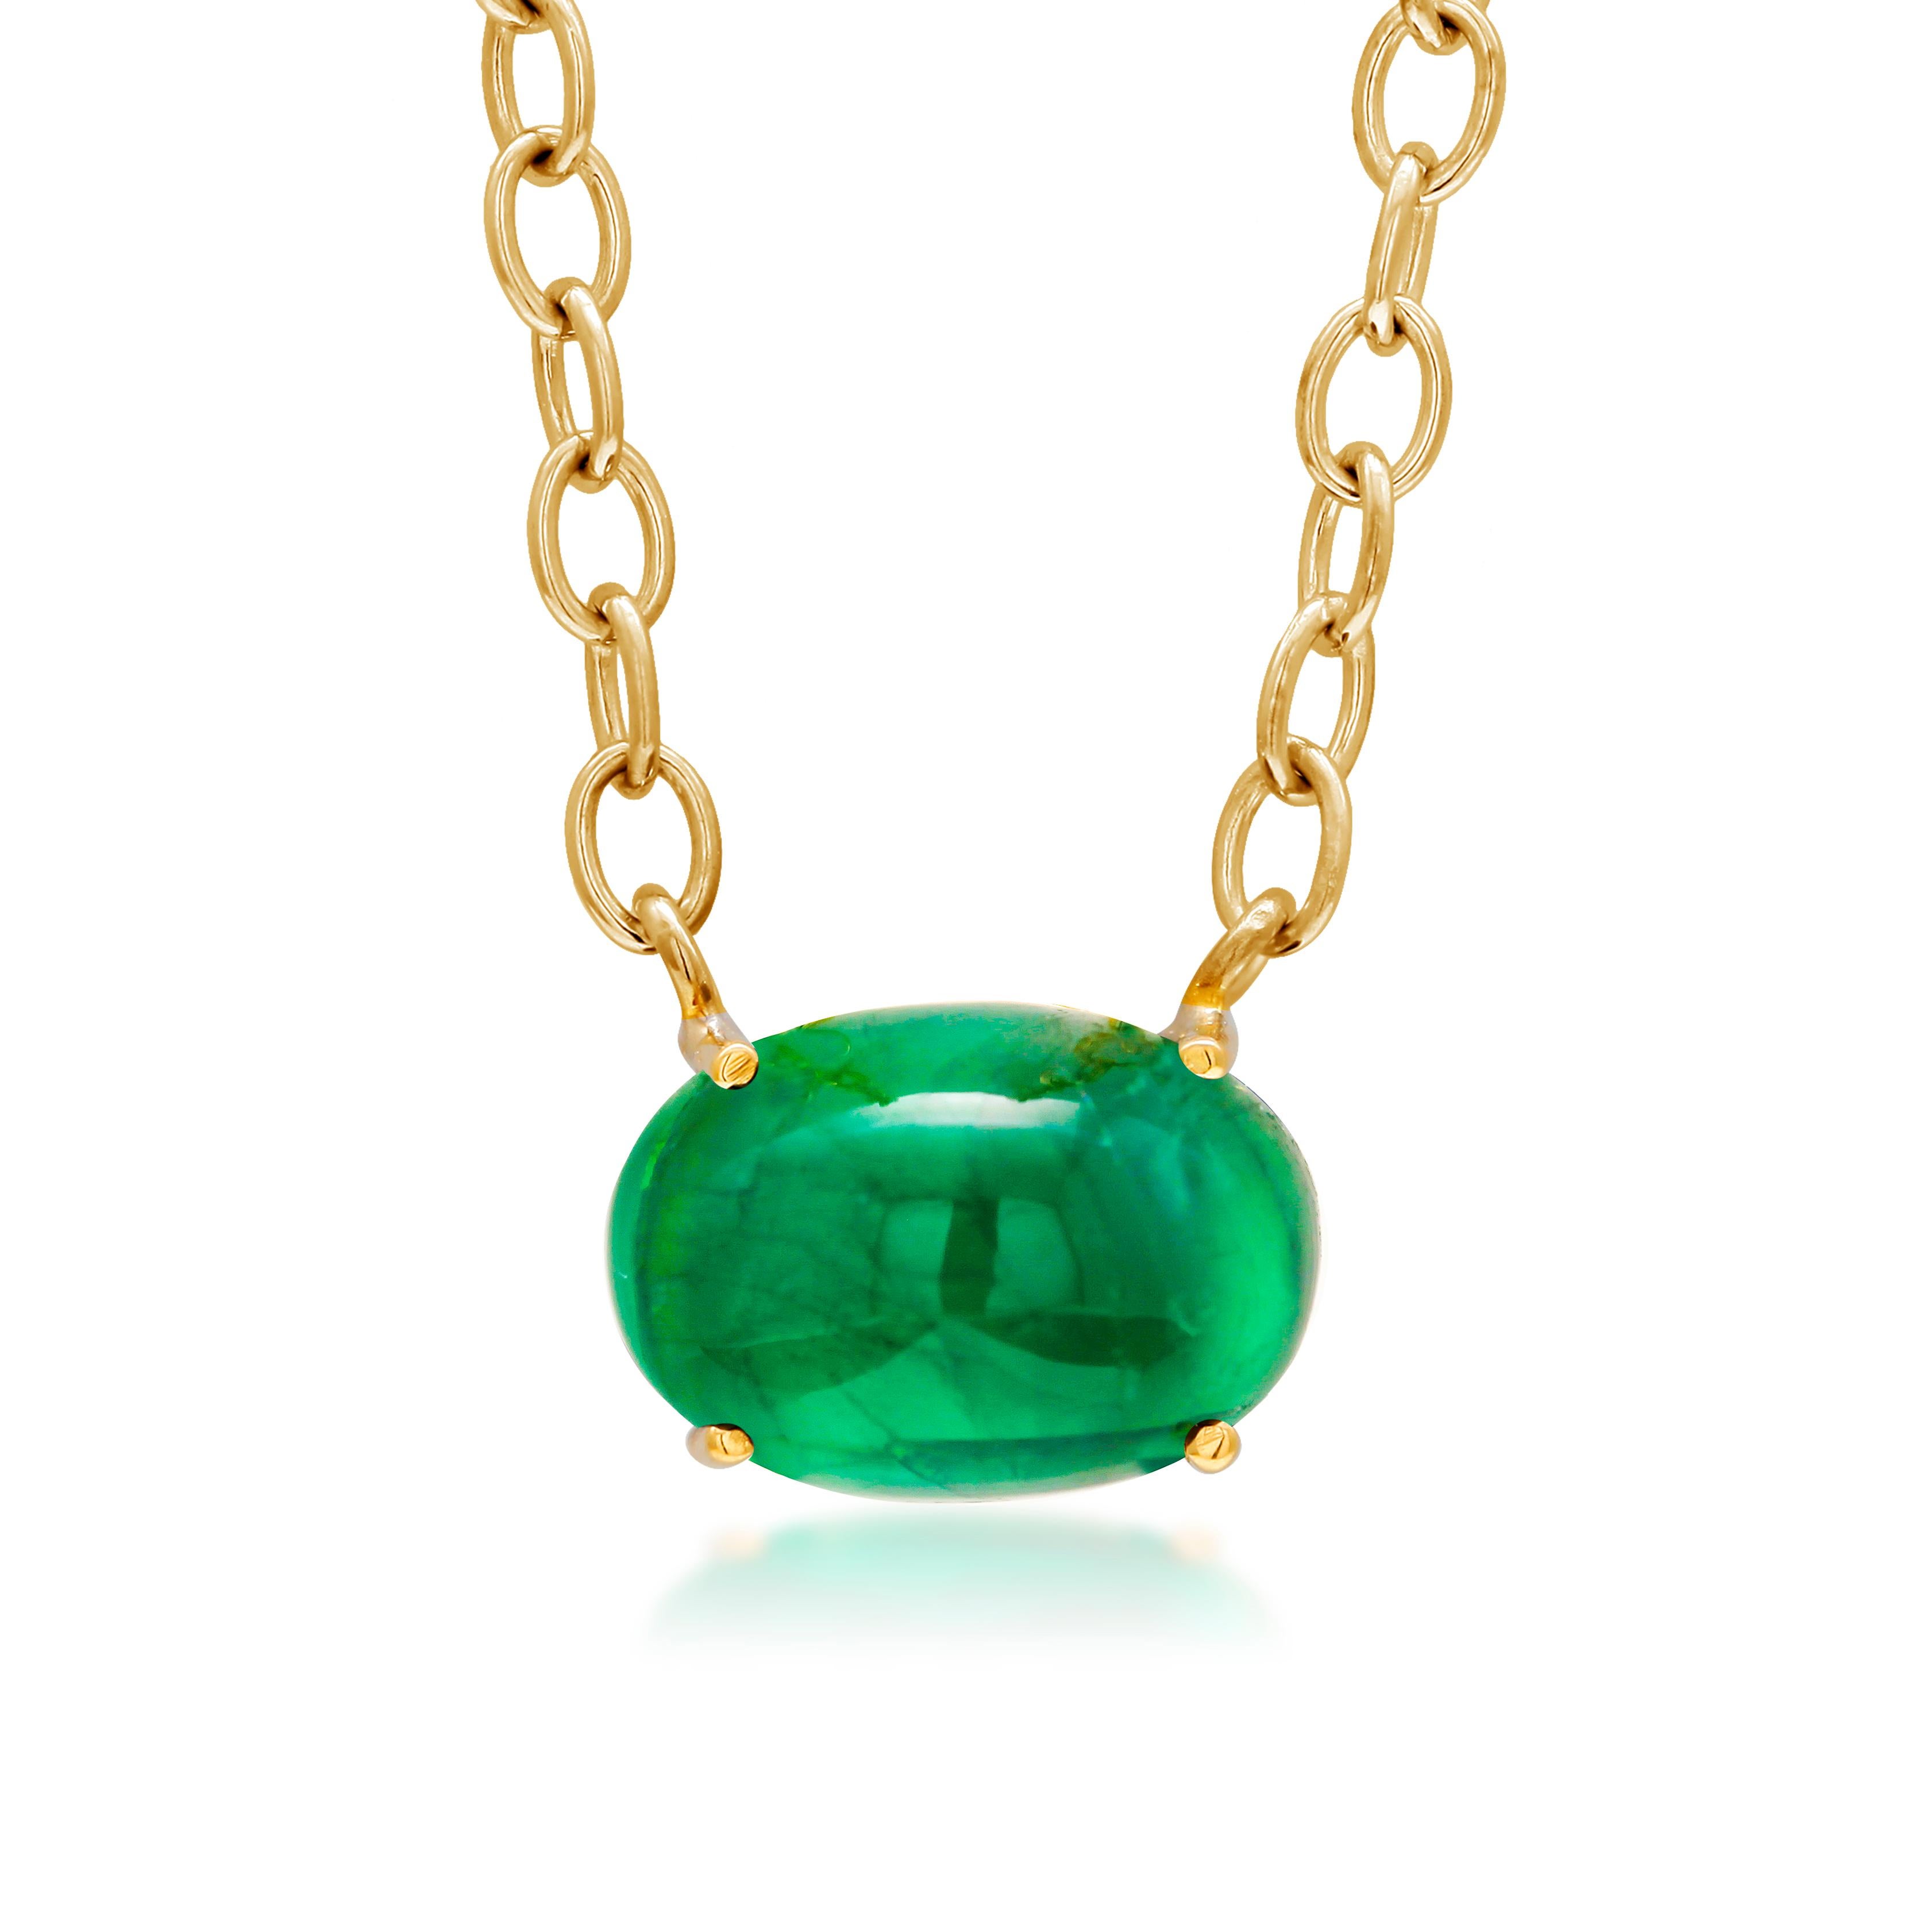 Modern Colombia Cabochon Emerald Weighing 6.53 Carat Yellow Gold Pendant Necklace